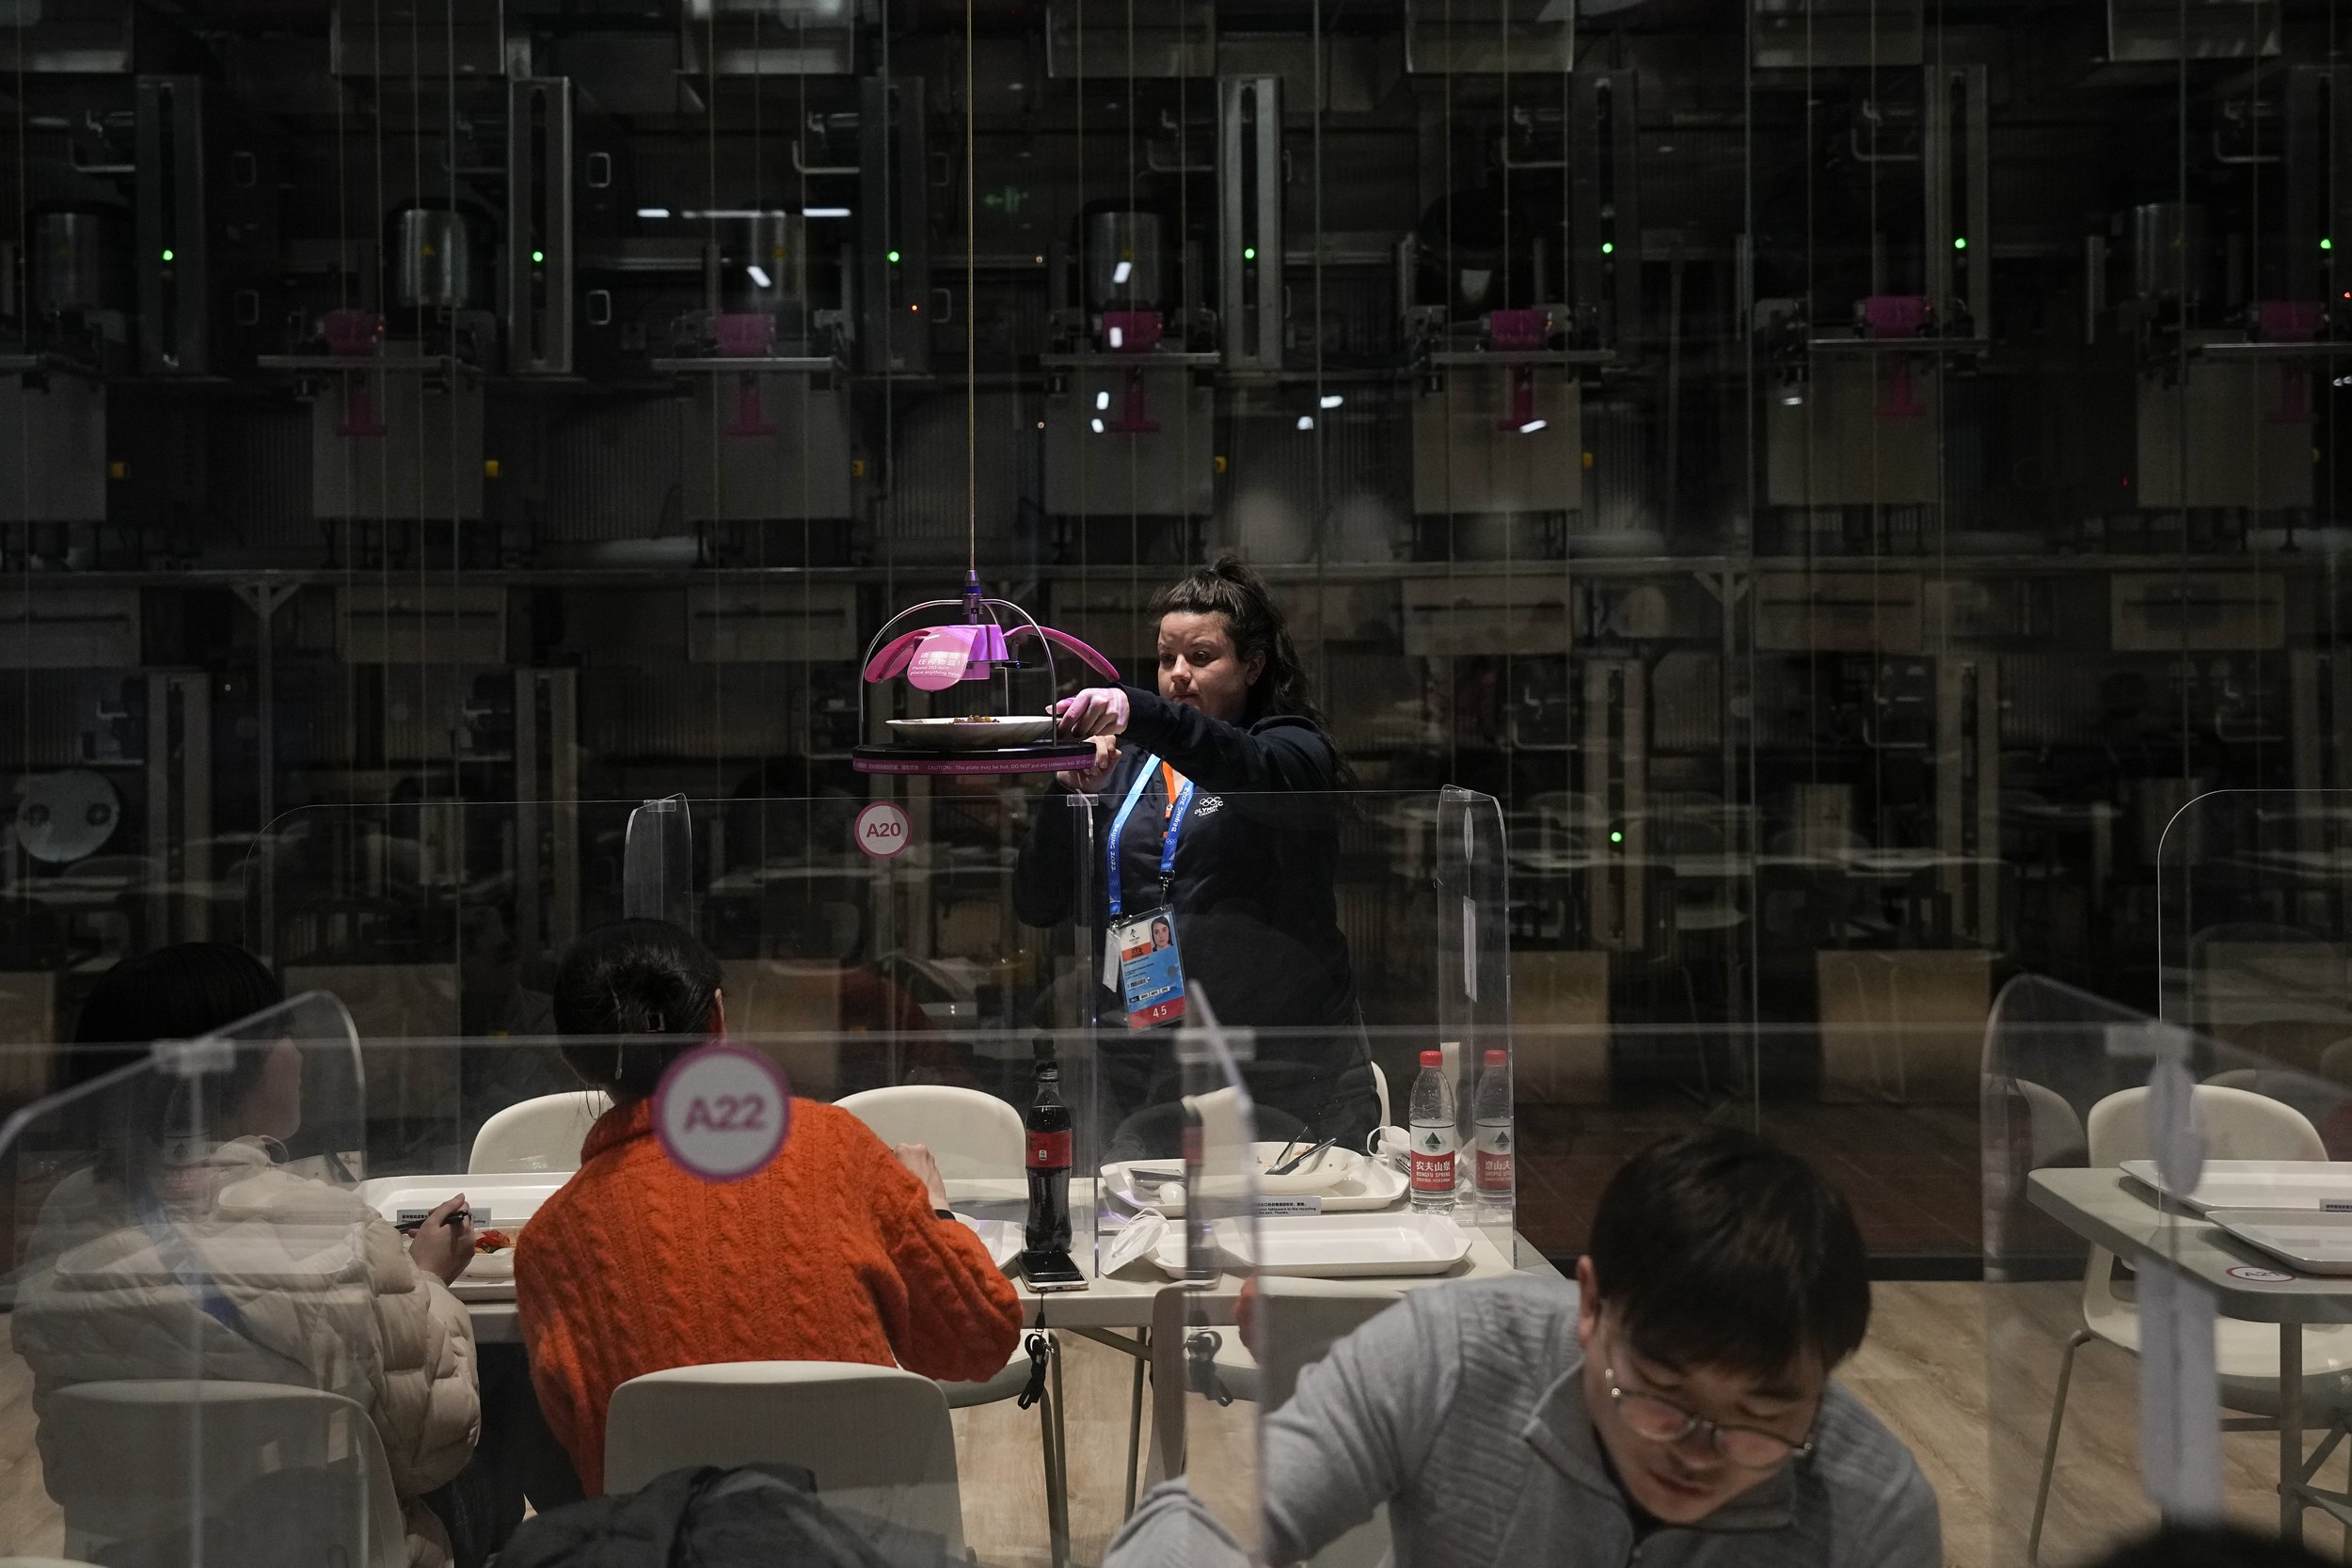  A woman grabs her lunch delivered to her robotically in the media dining area of the main media center ahead of the 2022 Winter Olympics, Wednesday, Feb. 2, 2022, in Beijing. (AP Photo/Jae C. Hong) 